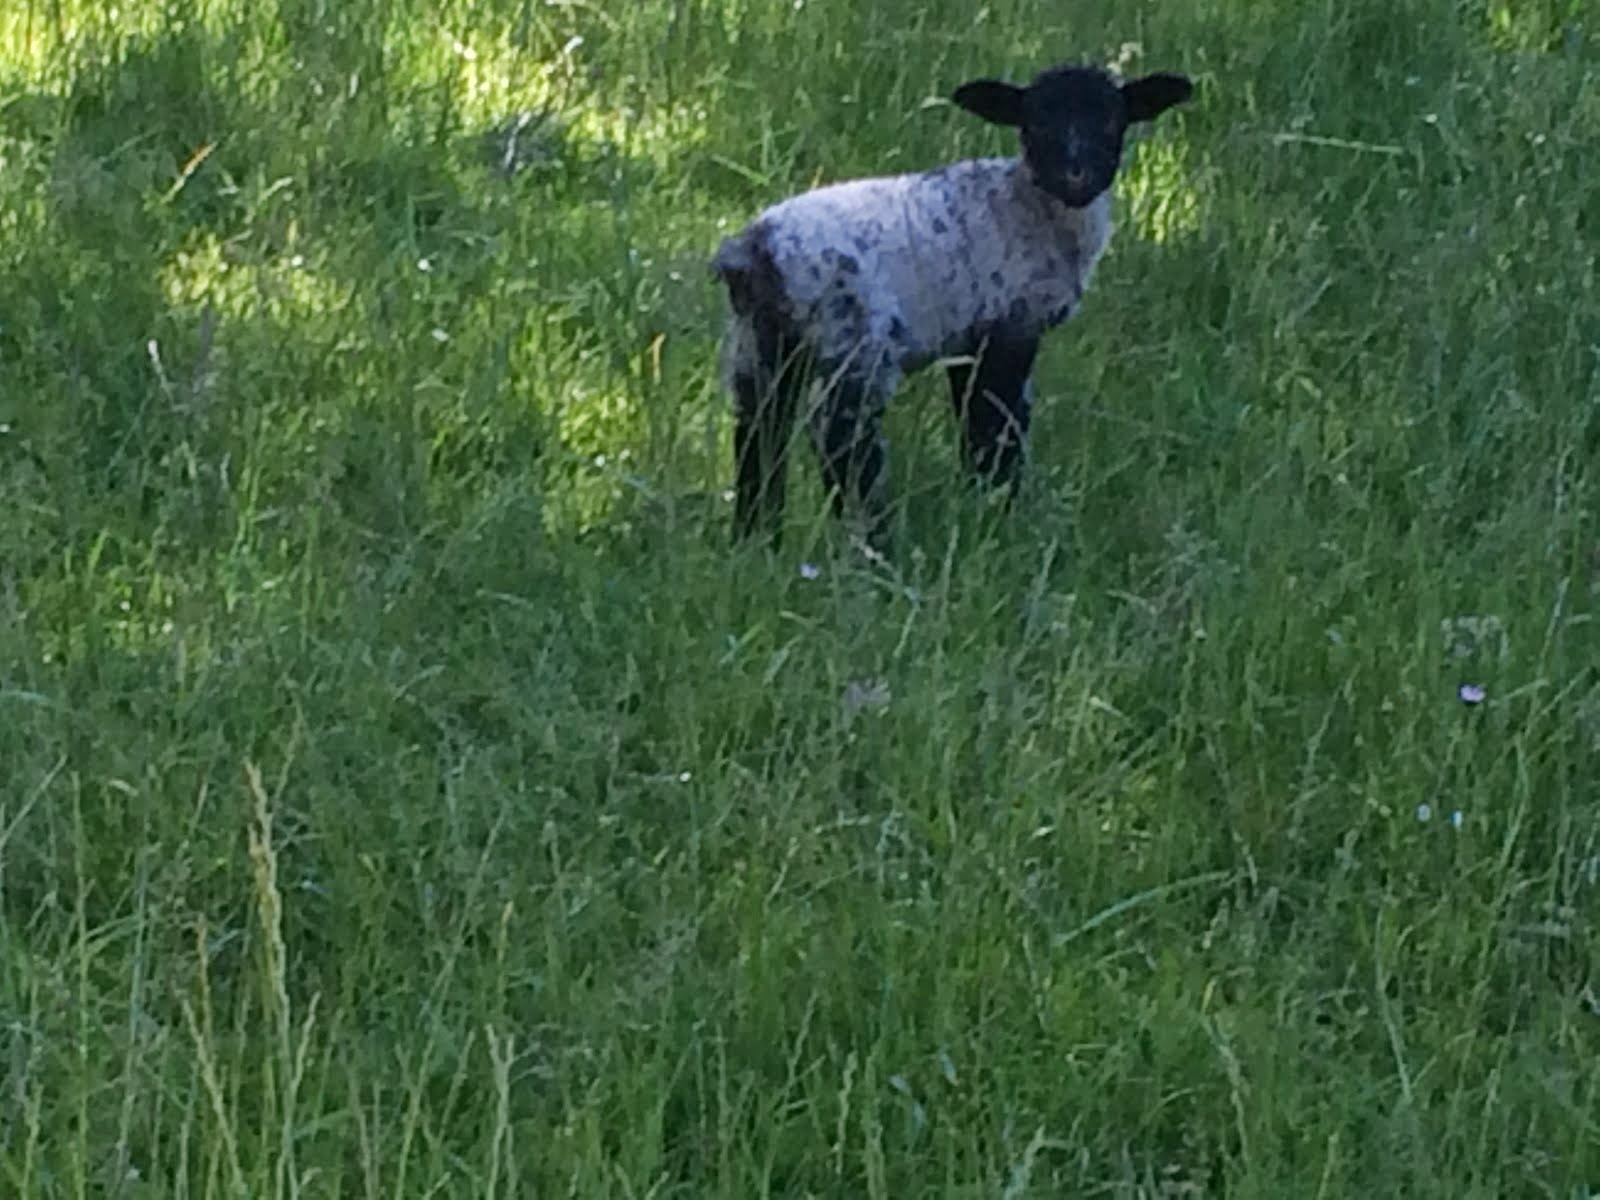 This lamb's owner (a farmer) said I have him!